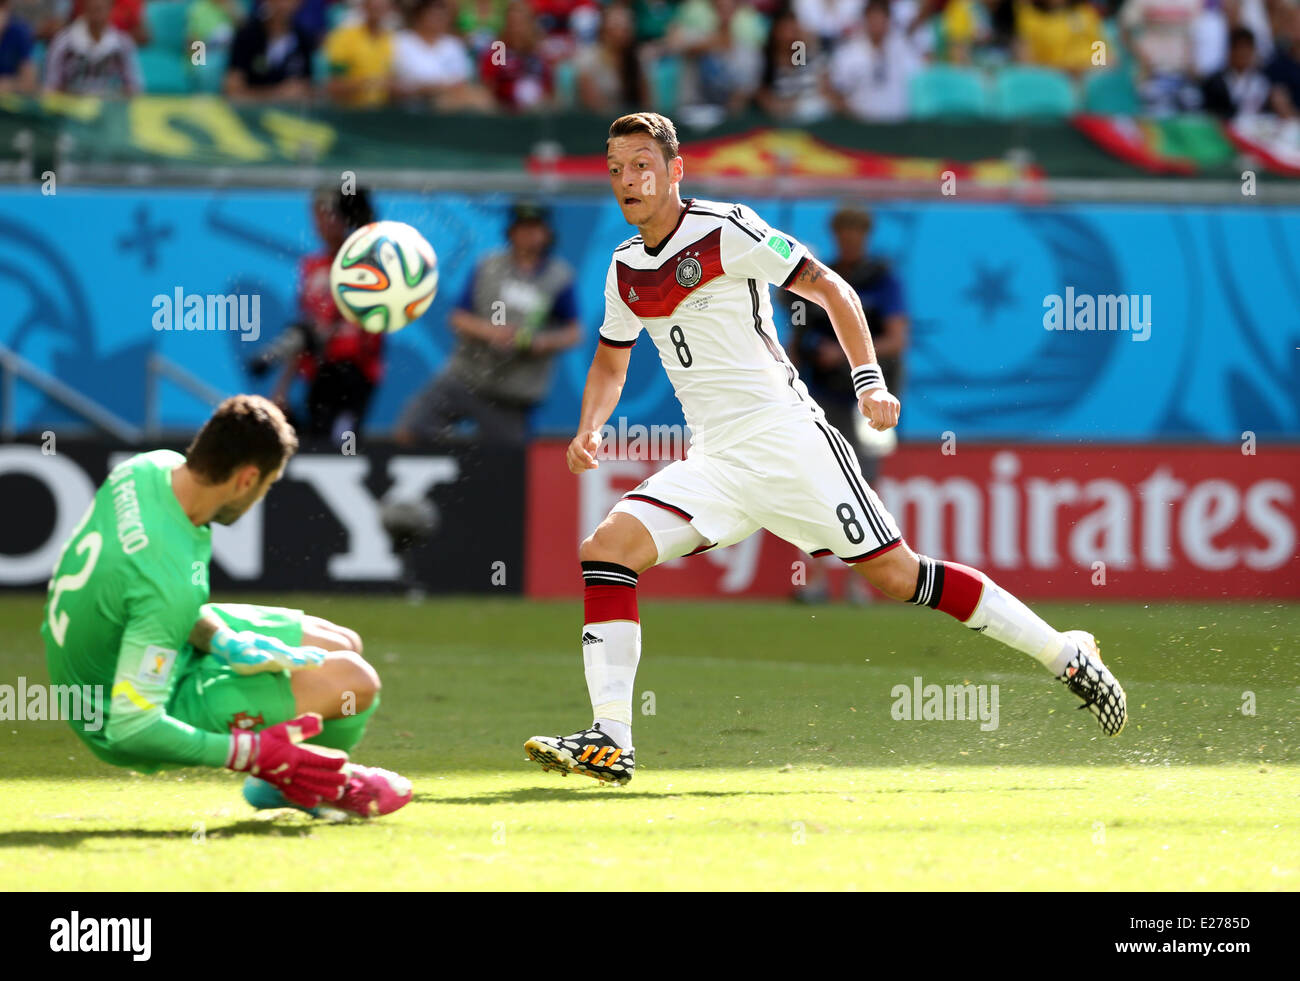 Savador, Brazil. 16th June, 2014. World Cup finals 2014. Germany versus Portugal. Ozil has this chance saved by Portugal goalkeeper Rui Patricio Credit:  Action Plus Sports/Alamy Live News Stock Photo